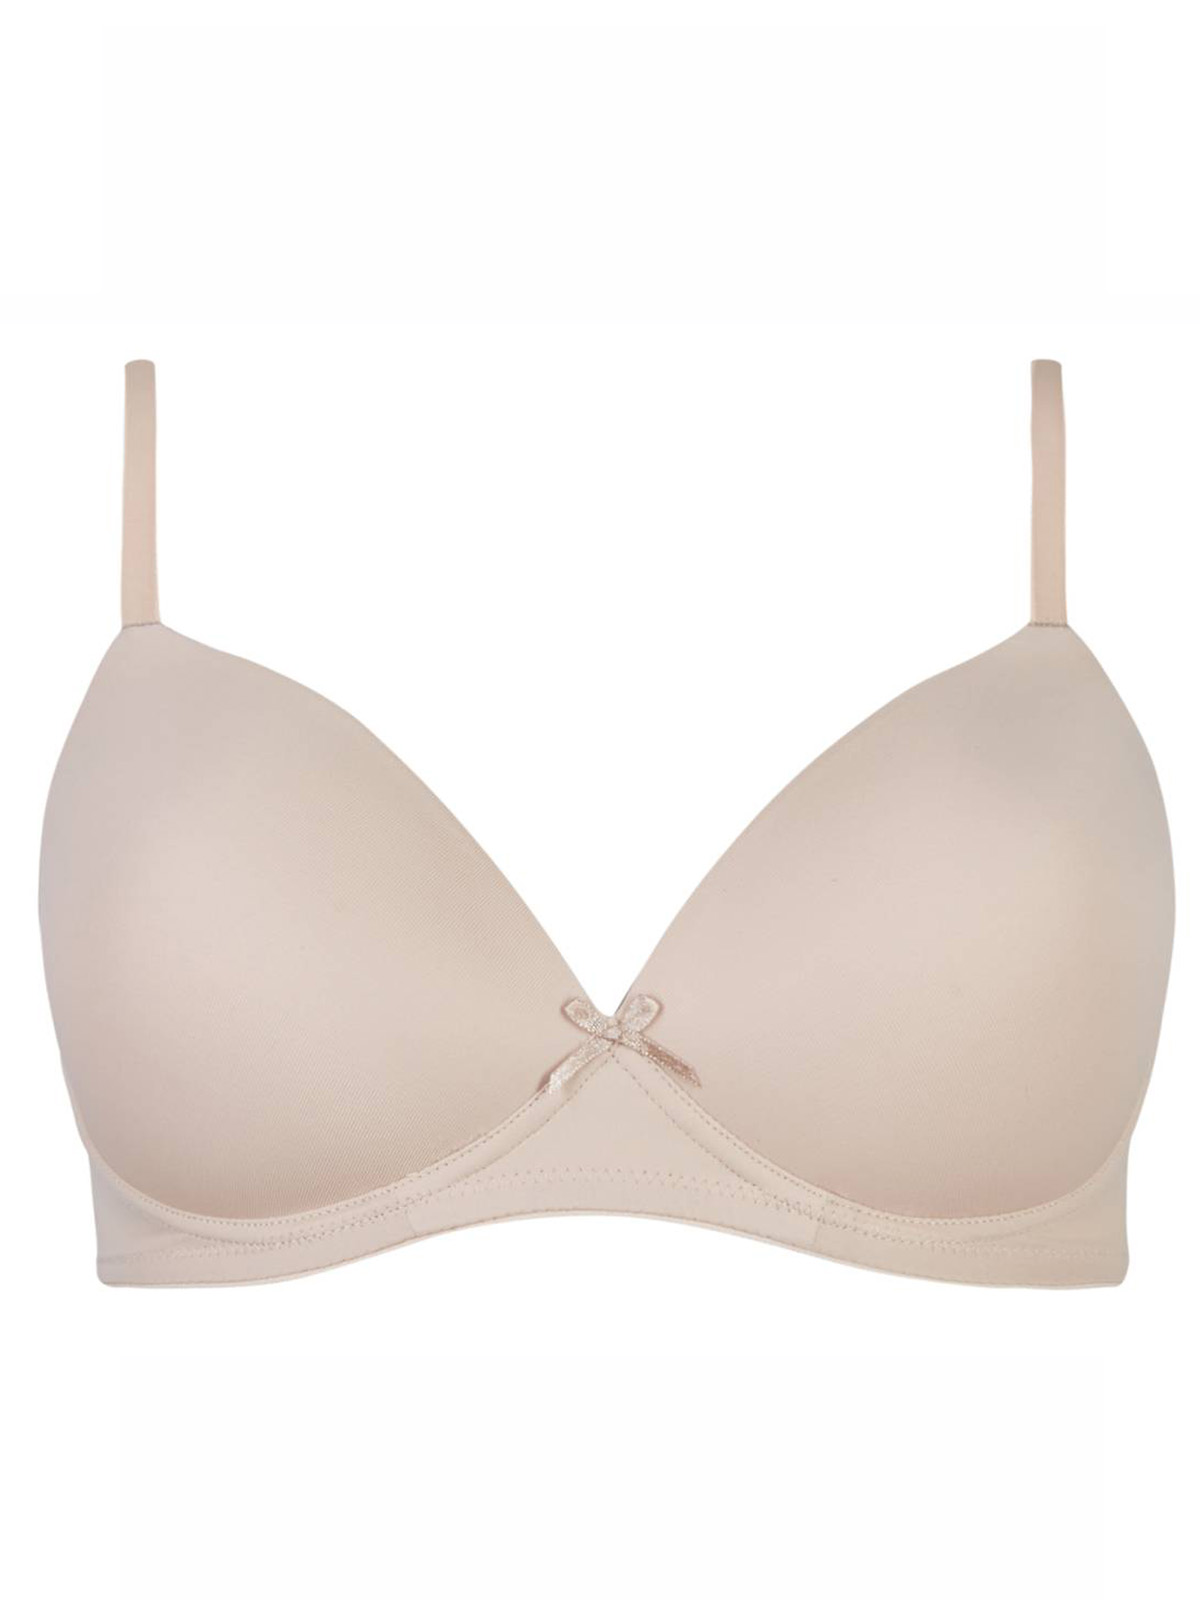 Marks and Spencer - - M&5 ALMOND Non-Wired Full Cup T-Shirt Bra - Size ...